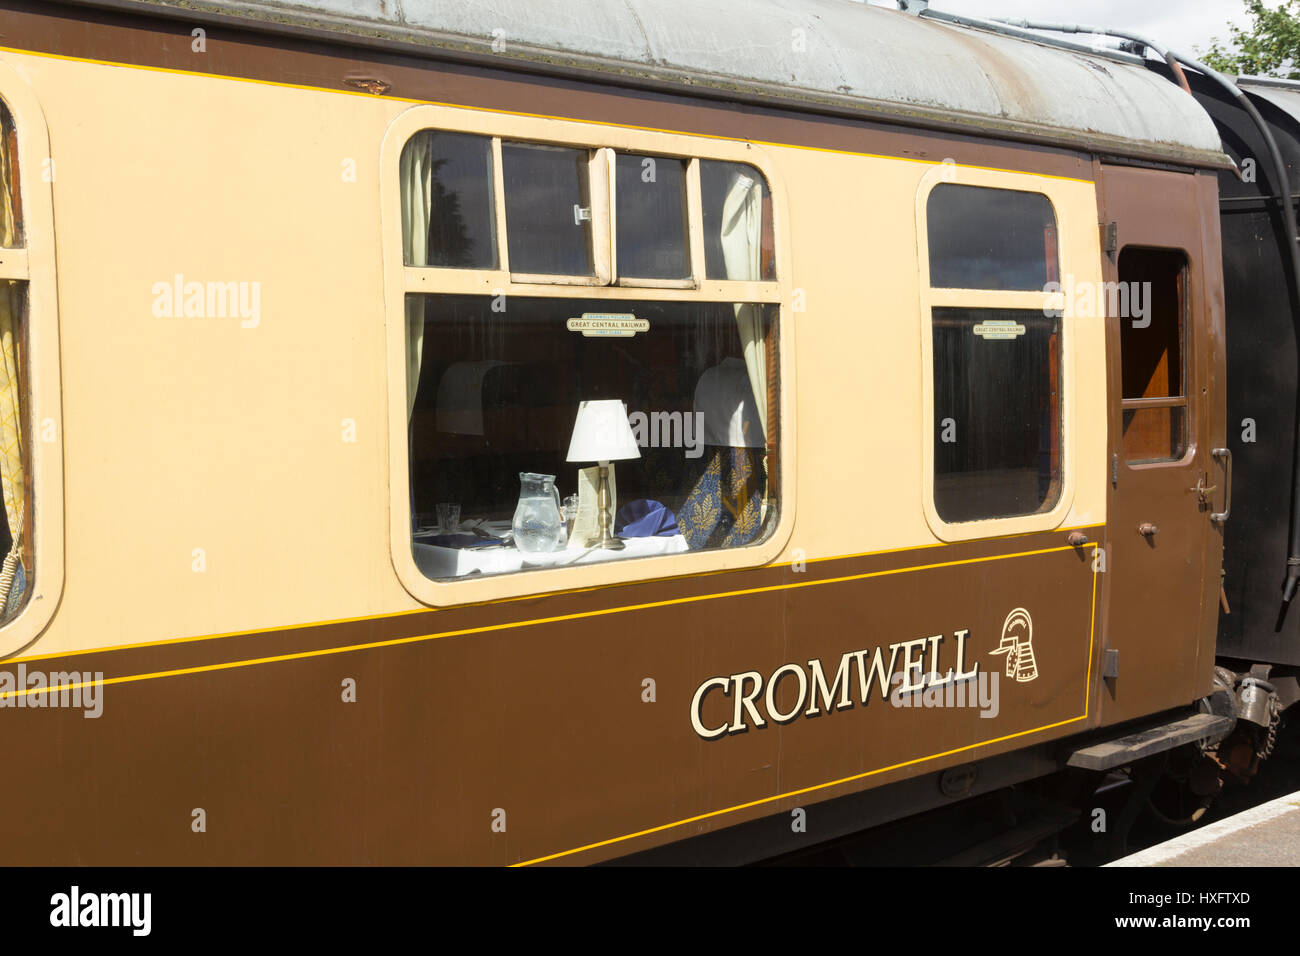 Exterior of a Cromwell Pullman  dining train on the Great Central Railway, Loughbrough.  The dining train carriages are not genuine Pullman coaches Stock Photo